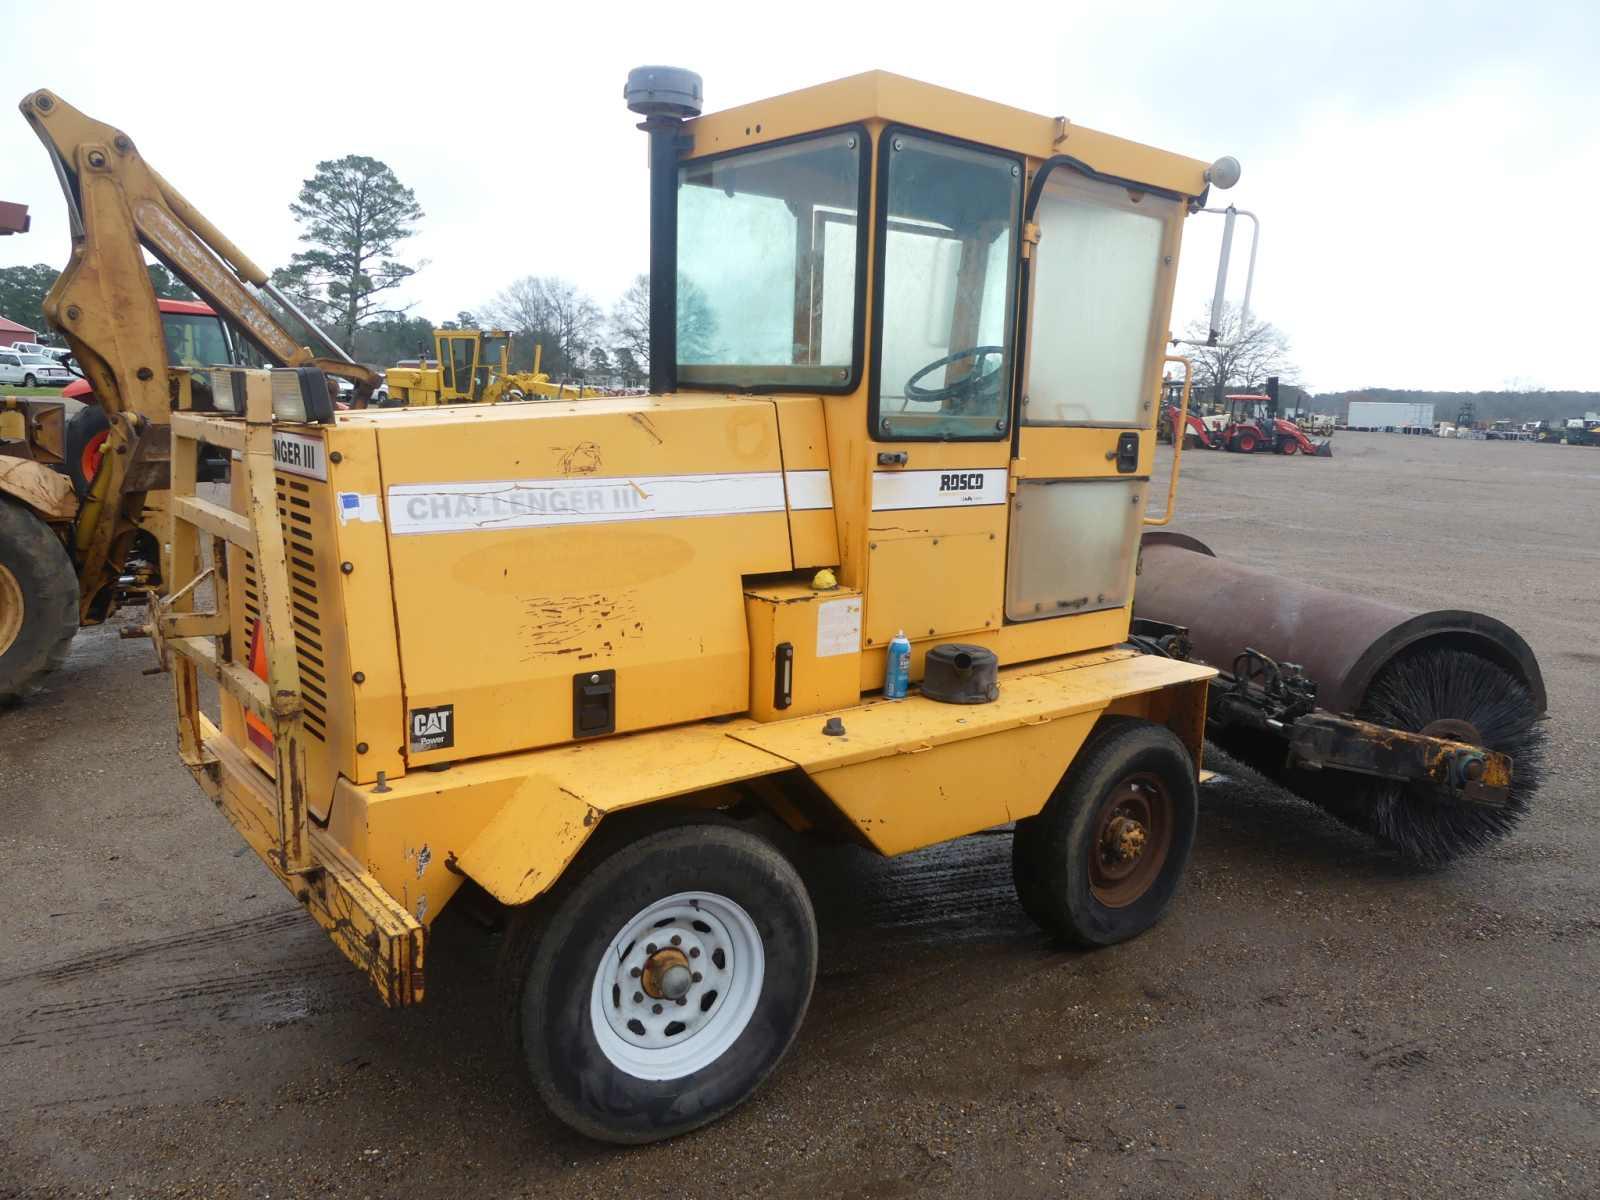 Rosco 4860 Sweeper, s/n 47421: Encl. Cab, Cat Eng.